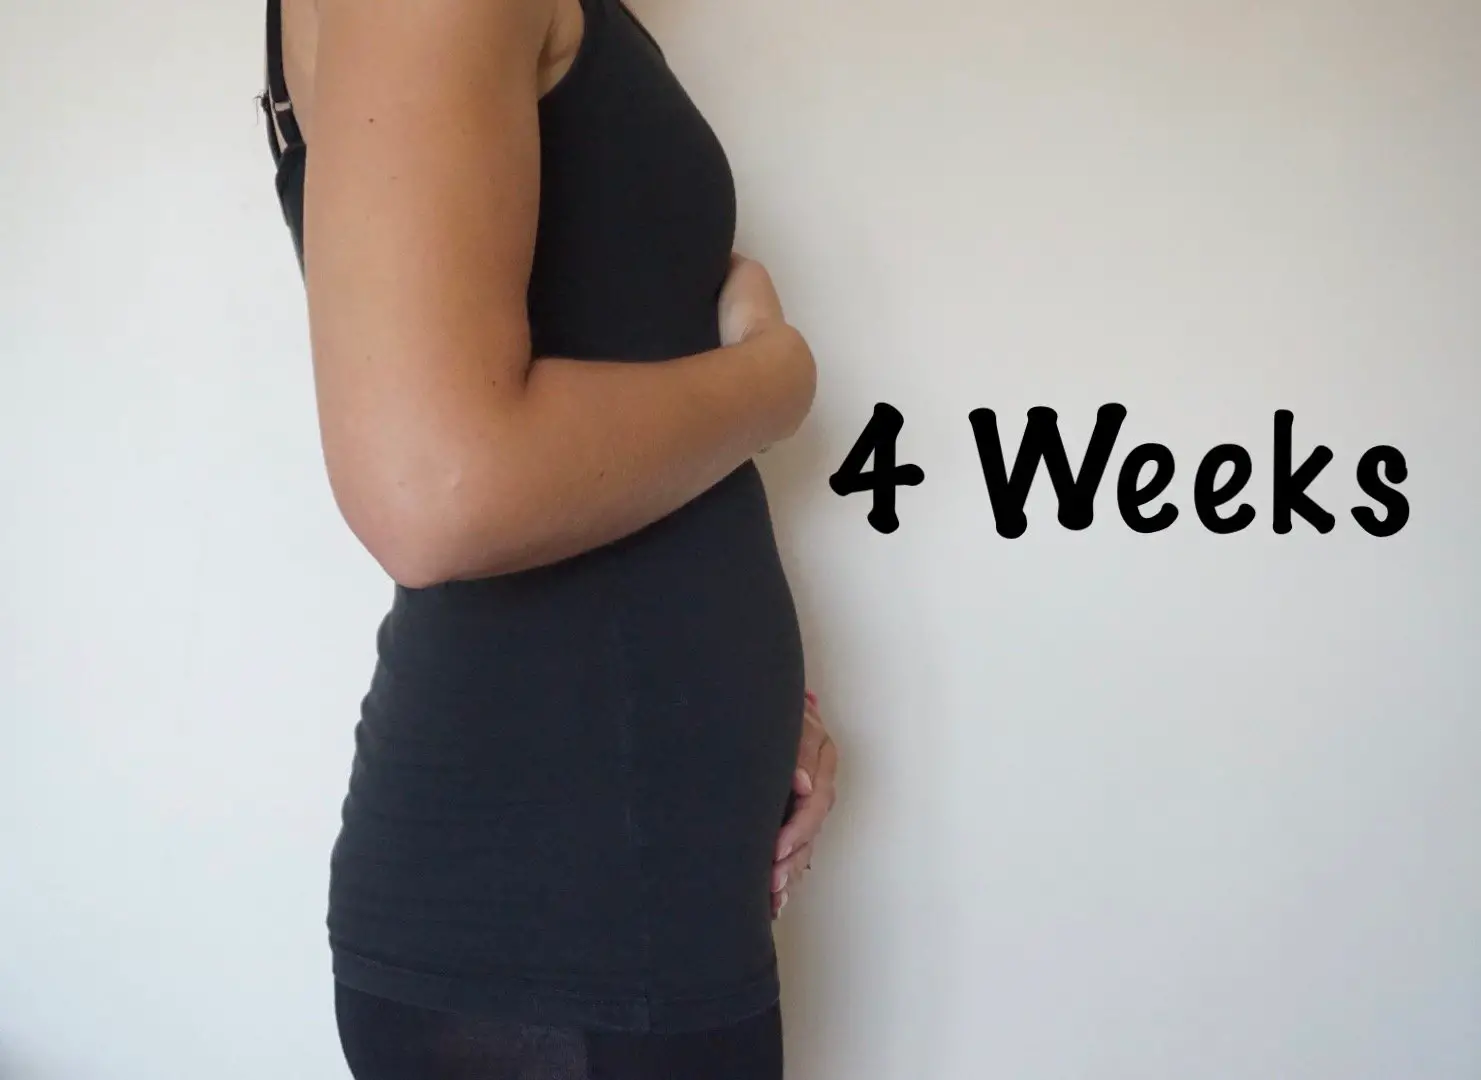 I am 4 weeks pregnant and feel bloated